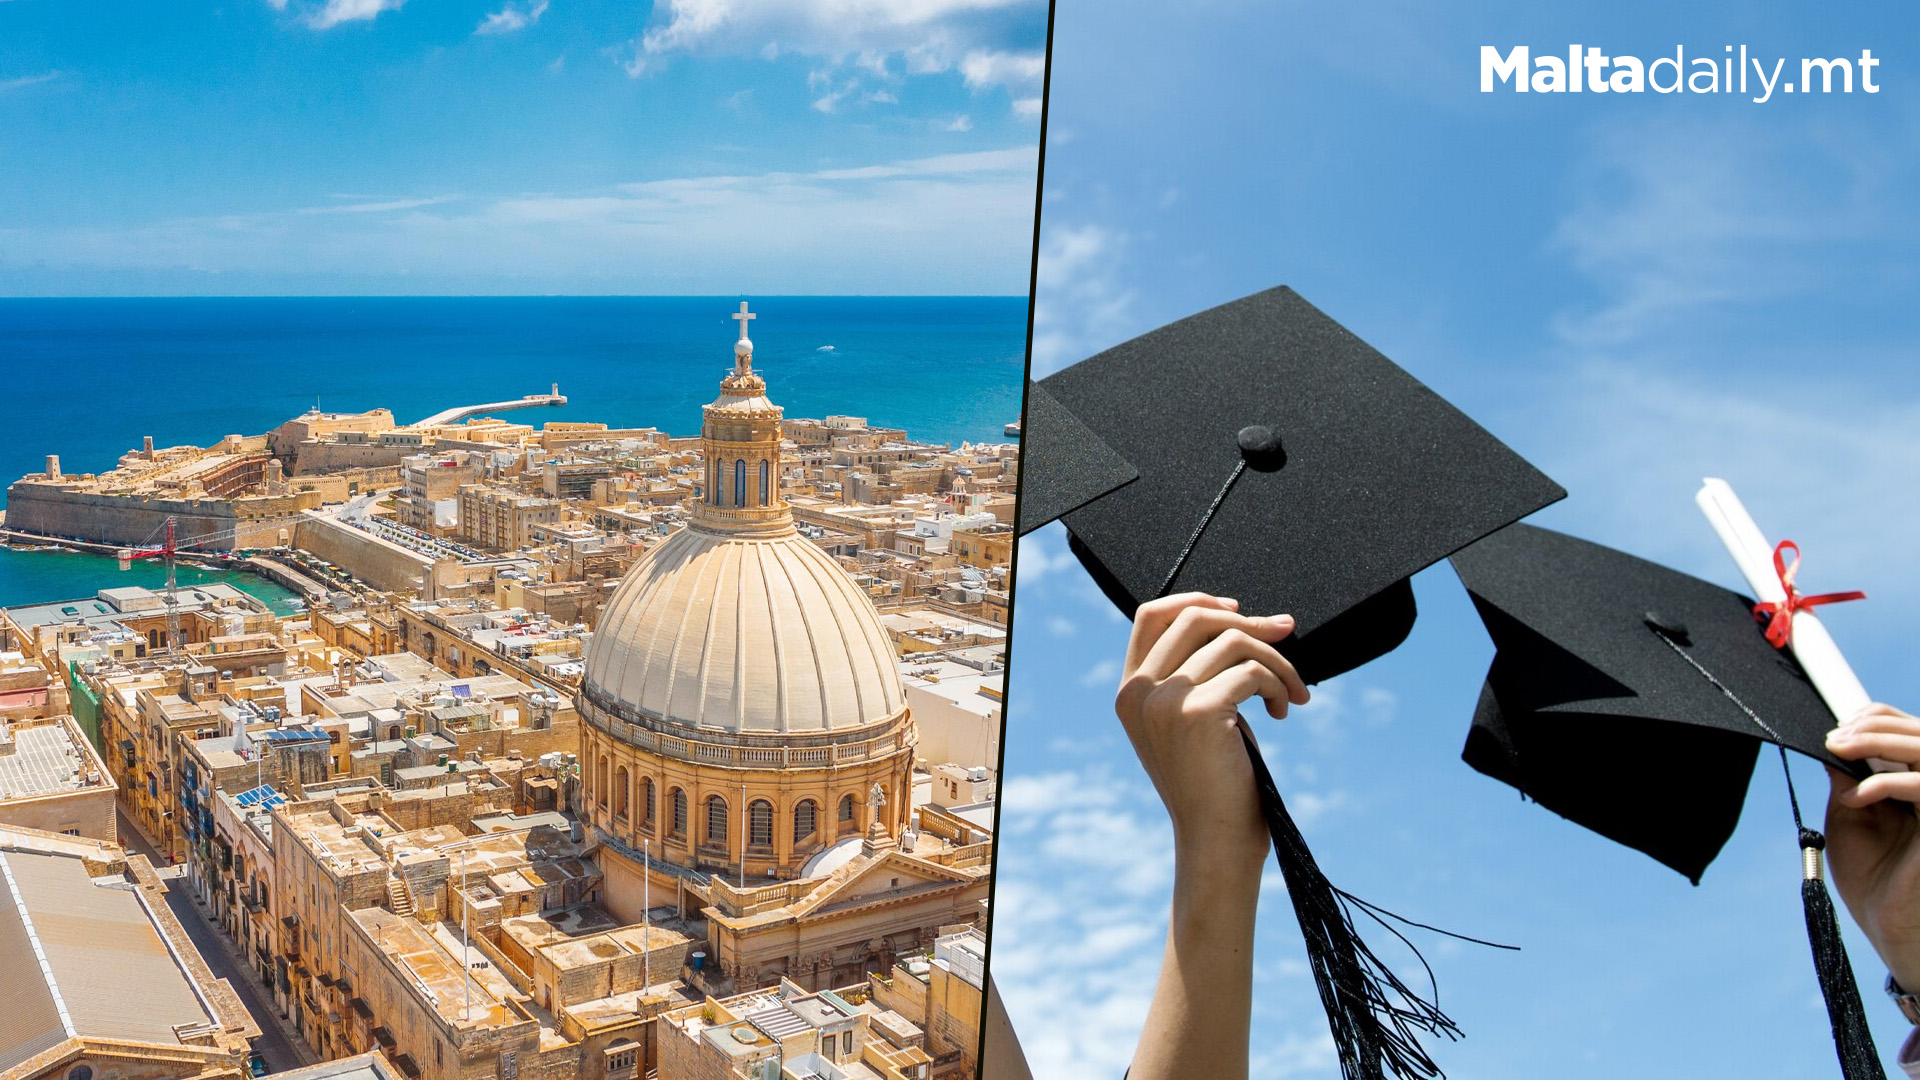 40% of Malta's Population With Low Education